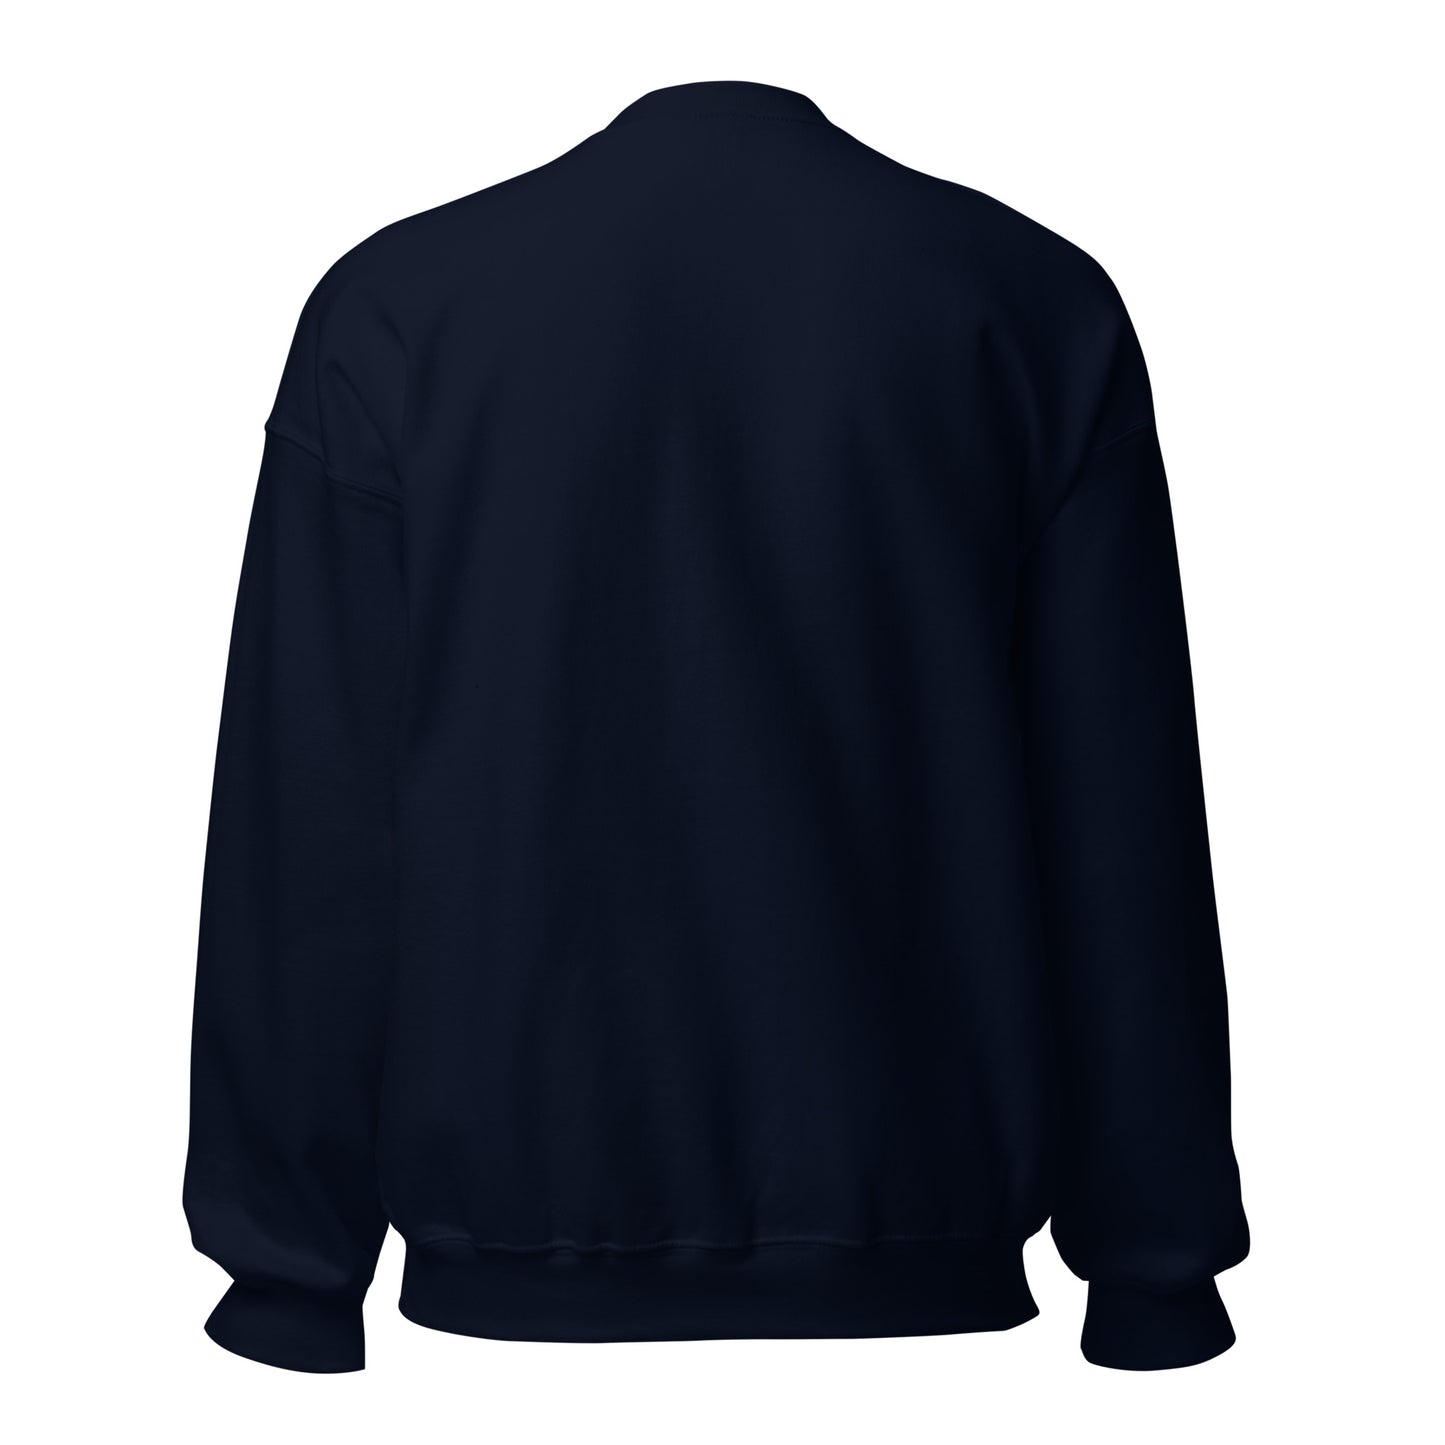 A54 Embroidered Crewneck in Navy